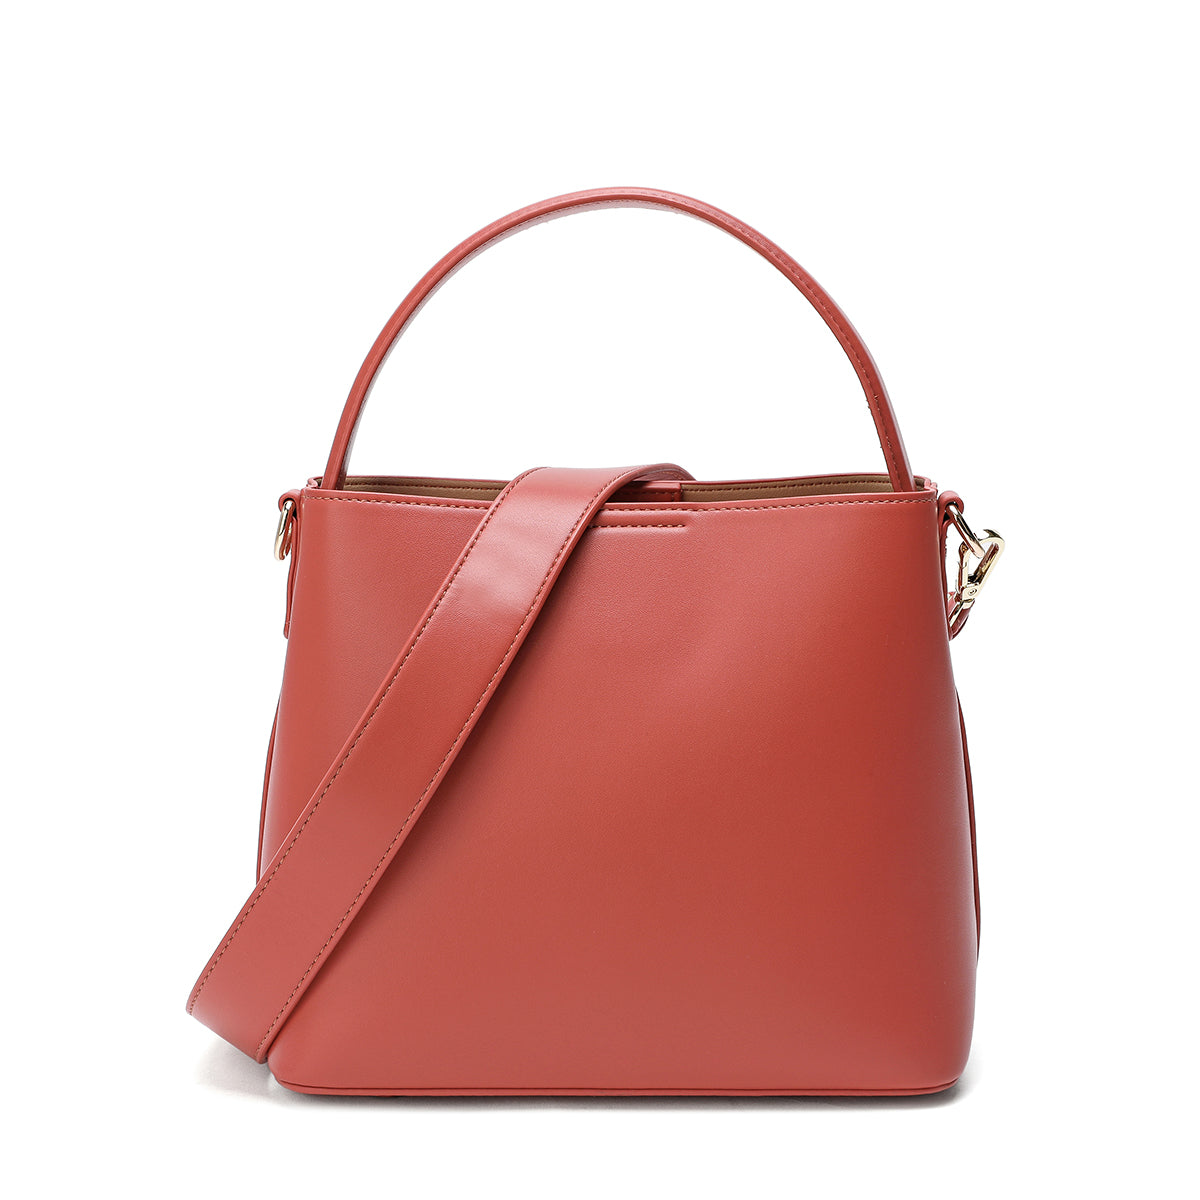 Elegant handbag with shoulder strap, width 23.5 cm, available in three colors